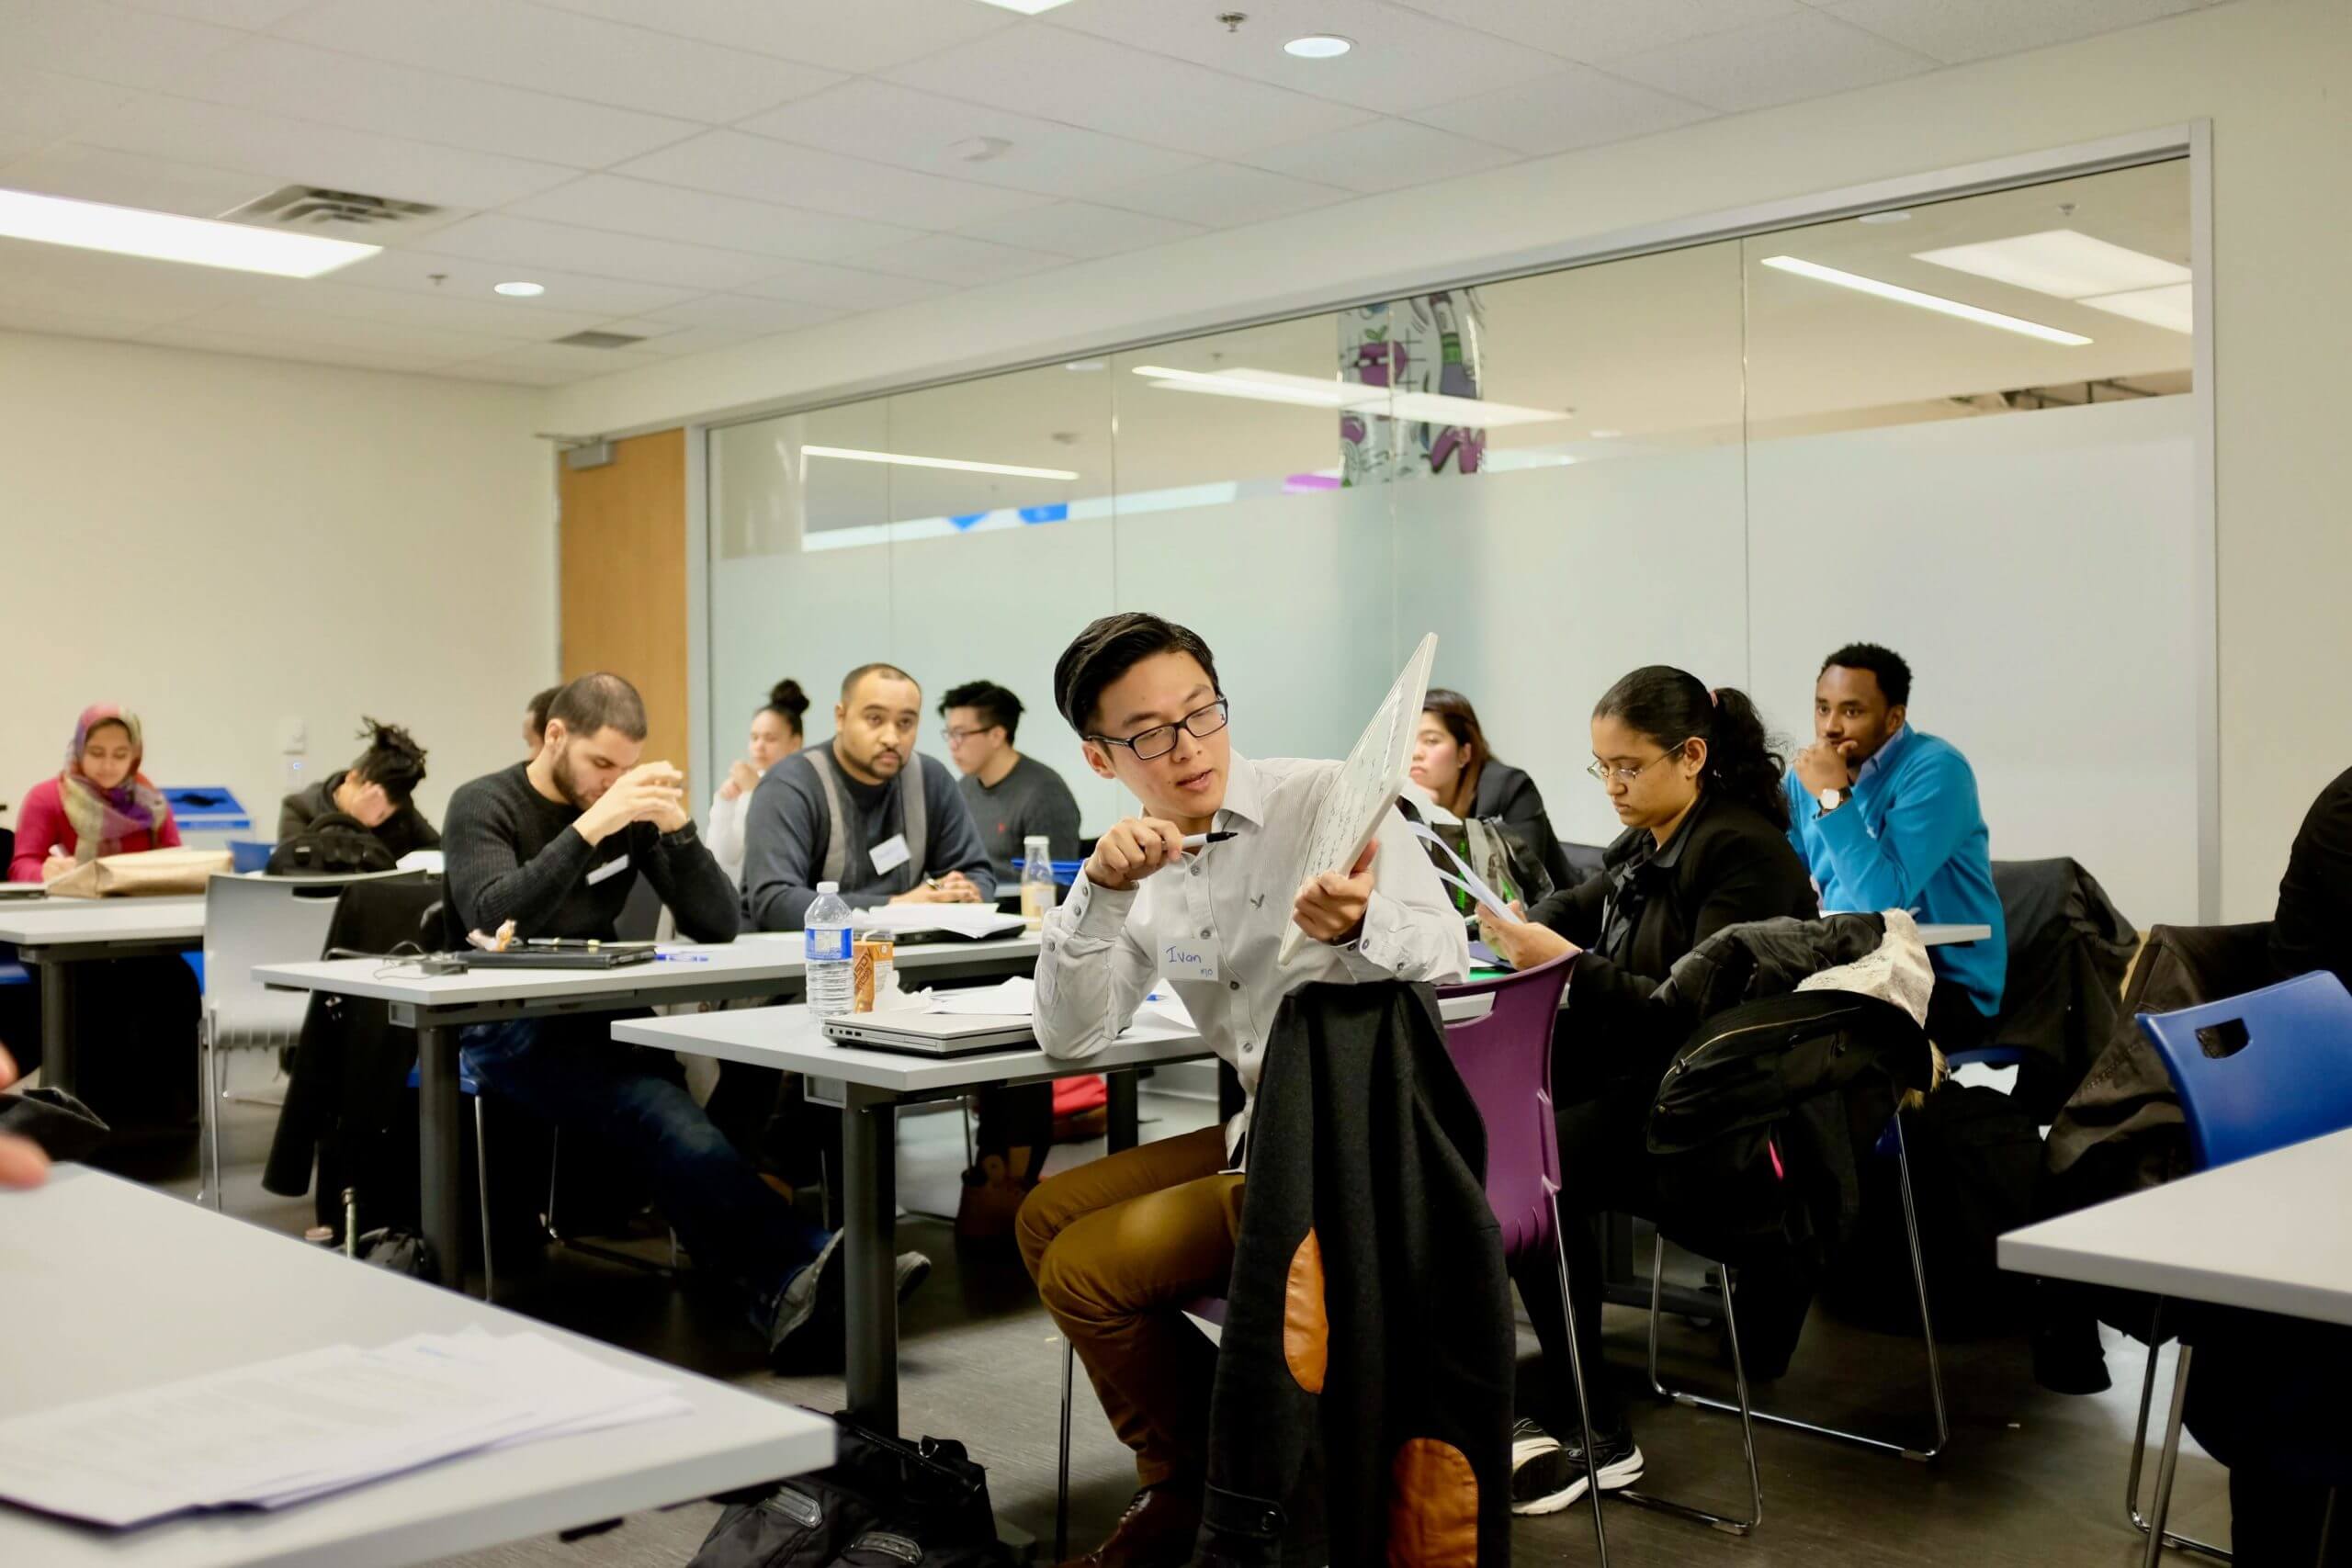 Image of a diverse group of tech students in a classroom